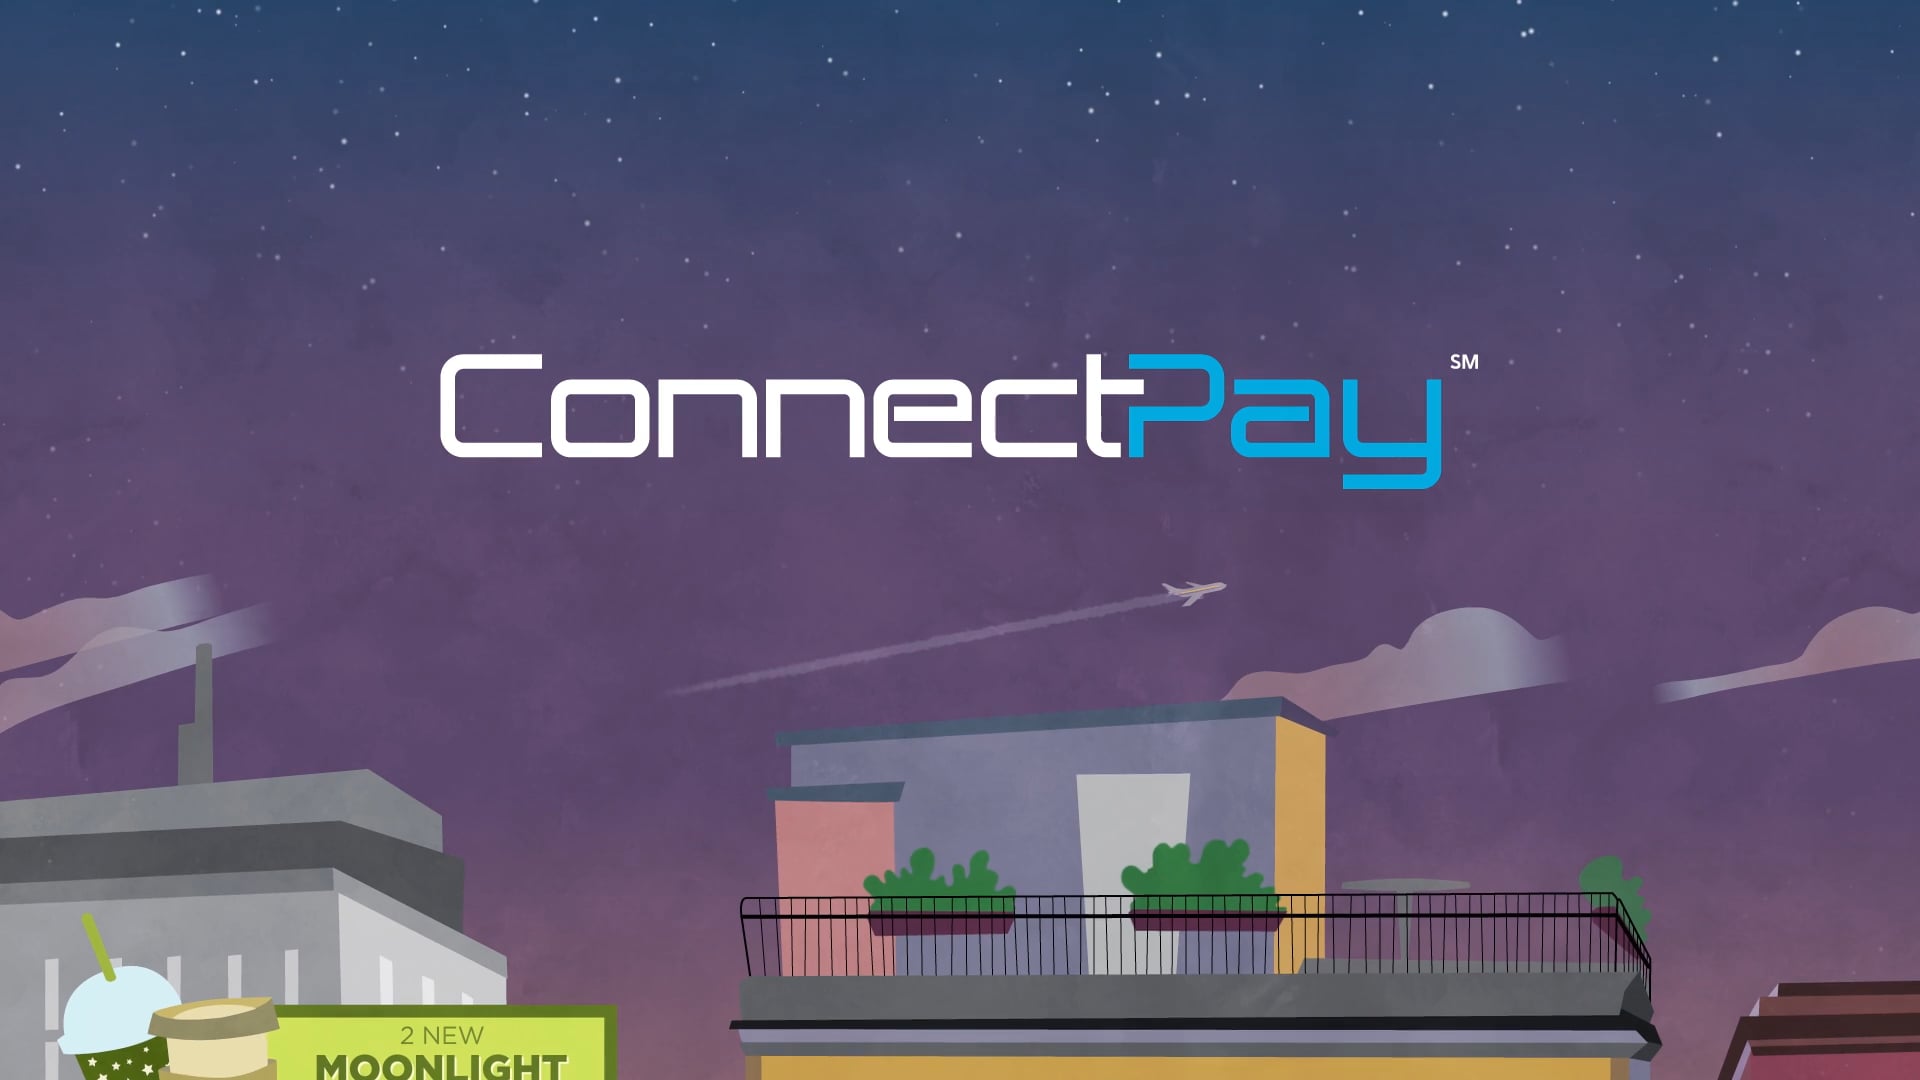 Animation - First Data (Connect Pay)